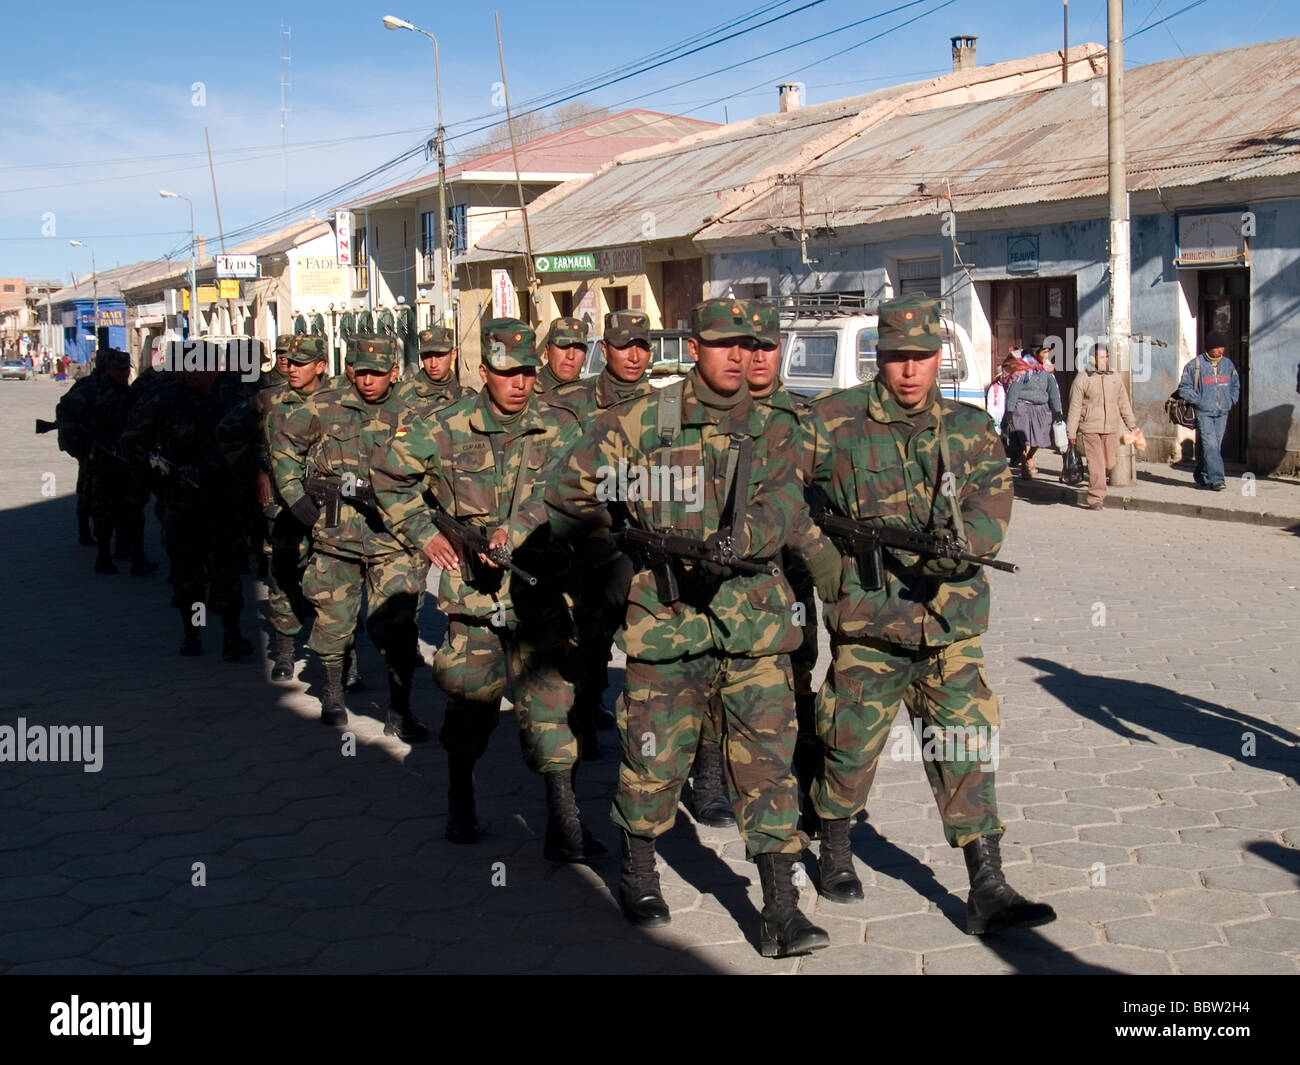 The Bolivian Army marching through the streets of Uyuni, Bolivia Stock Photo